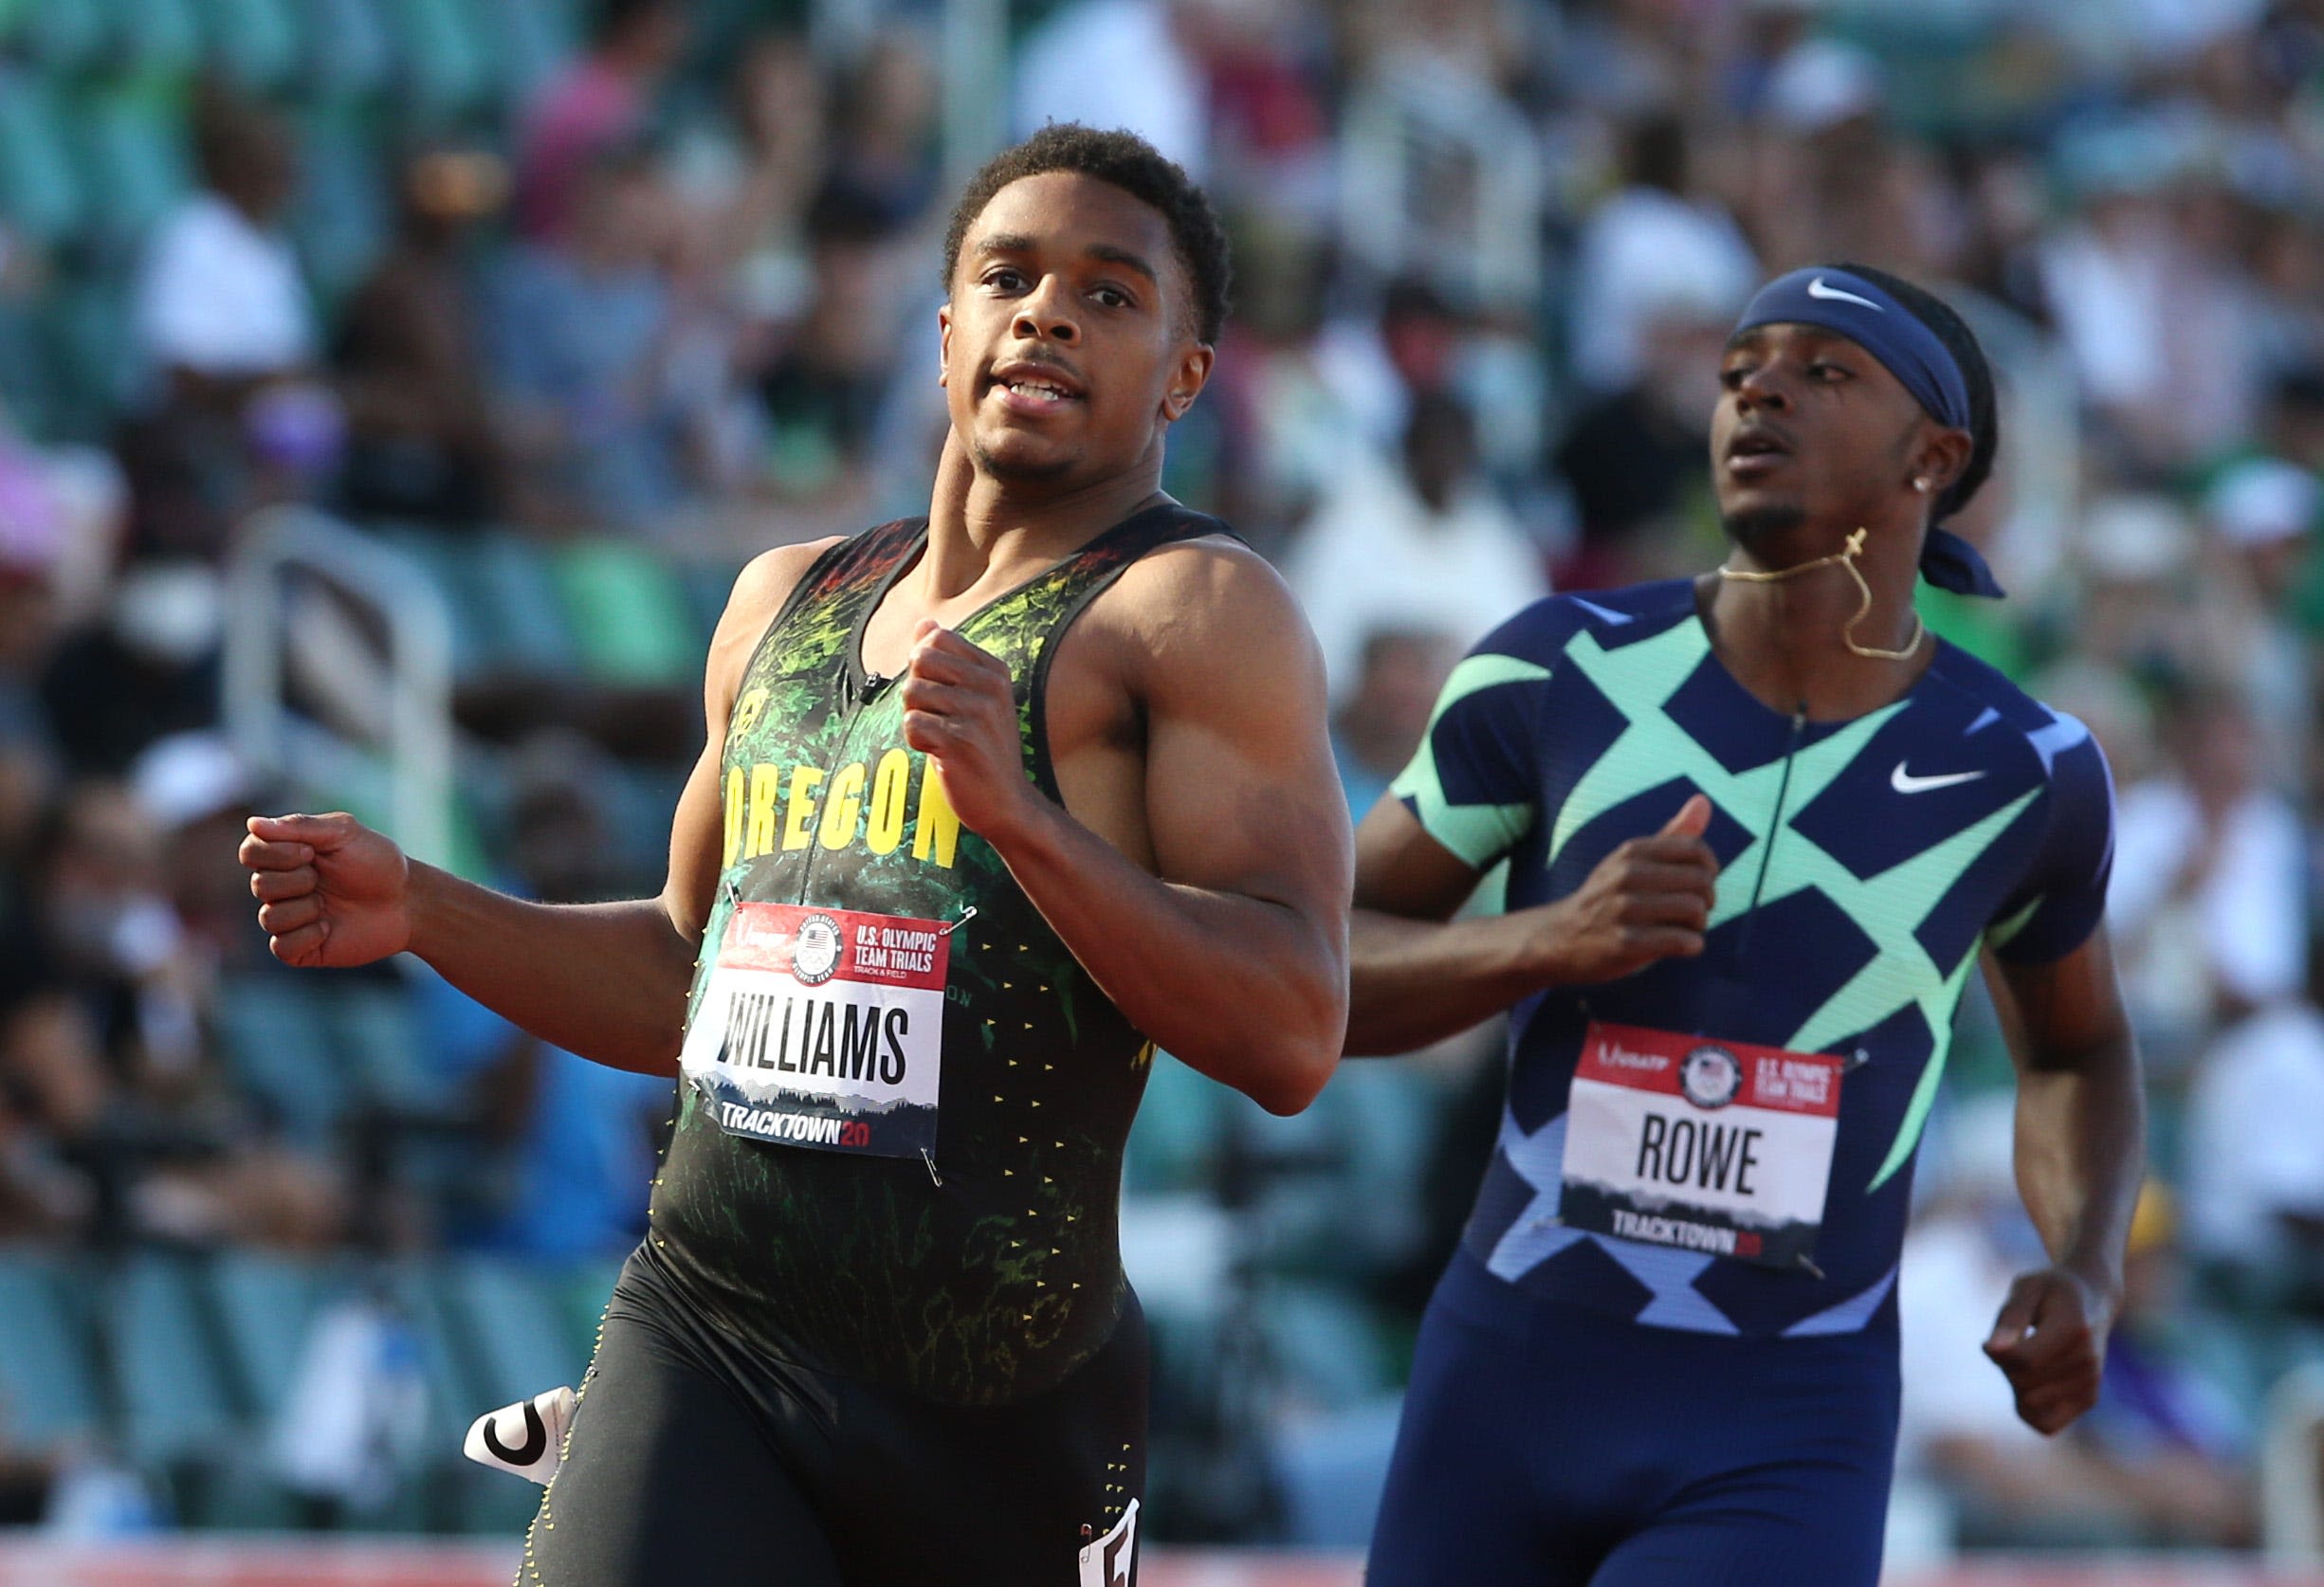 Olympian Micah Williams no longer an Oregon Duck as the star sprinter transfers to USC